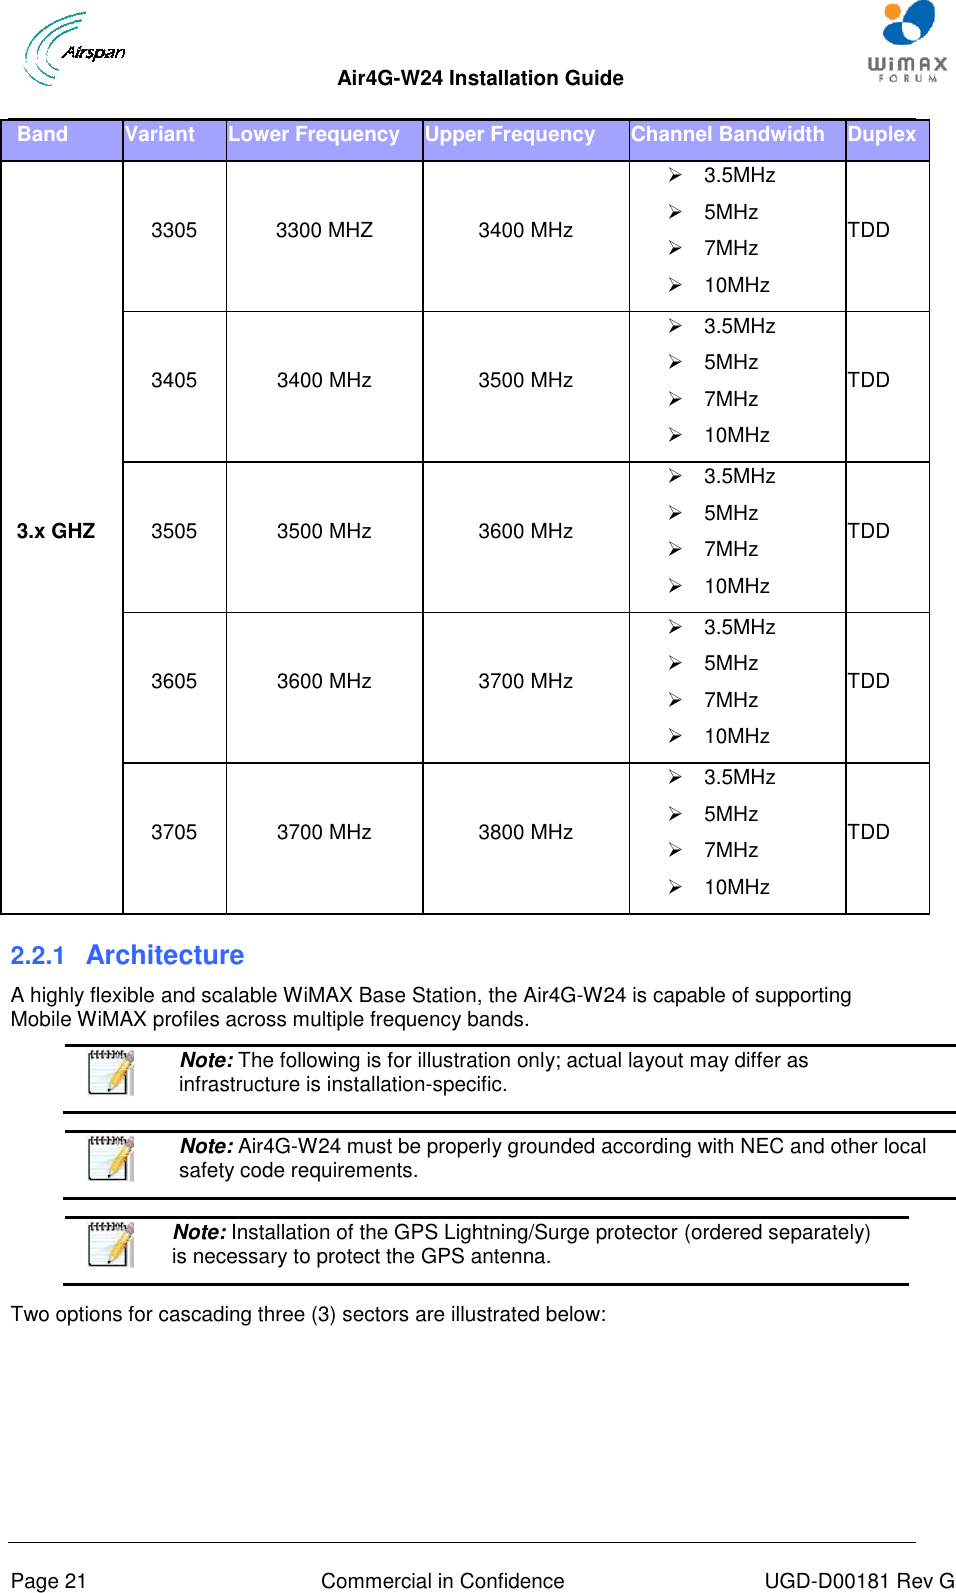  Air4G-W24 Installation Guide       Page 21  Commercial in Confidence  UGD-D00181 Rev G Band Variant Lower Frequency Upper Frequency Channel Bandwidth Duplex 3.x GHZ 3305 3300 MHZ 3400 MHz   3.5MHz   5MHz   7MHz   10MHz TDD 3405 3400 MHz 3500 MHz   3.5MHz   5MHz   7MHz   10MHz TDD 3505 3500 MHz 3600 MHz   3.5MHz   5MHz   7MHz   10MHz TDD 3605 3600 MHz 3700 MHz   3.5MHz   5MHz   7MHz   10MHz TDD 3705 3700 MHz 3800 MHz   3.5MHz   5MHz   7MHz   10MHz TDD 2.2.1  Architecture A highly flexible and scalable WiMAX Base Station, the Air4G-W24 is capable of supporting Mobile WiMAX profiles across multiple frequency bands.   Note: The following is for illustration only; actual layout may differ as infrastructure is installation-specific.    Note: Air4G-W24 must be properly grounded according with NEC and other local safety code requirements.   Note: Installation of the GPS Lightning/Surge protector (ordered separately) is necessary to protect the GPS antenna.  Two options for cascading three (3) sectors are illustrated below: 